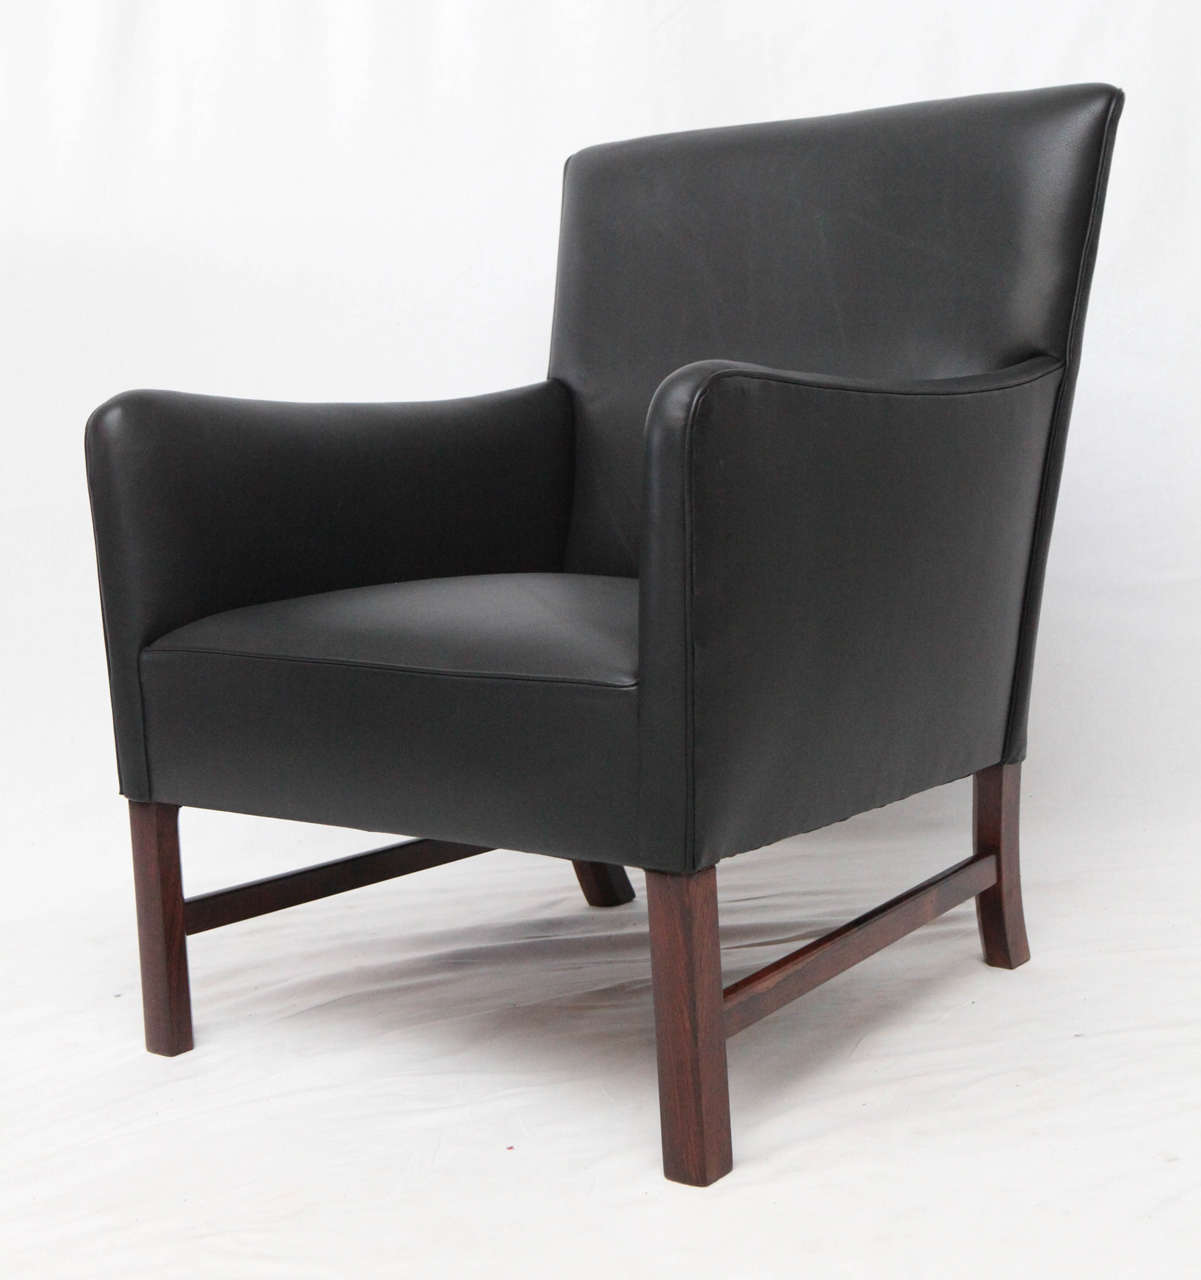 Ole Wanscher lounge chair designed in 1960 and produced by A. J. Iversen.